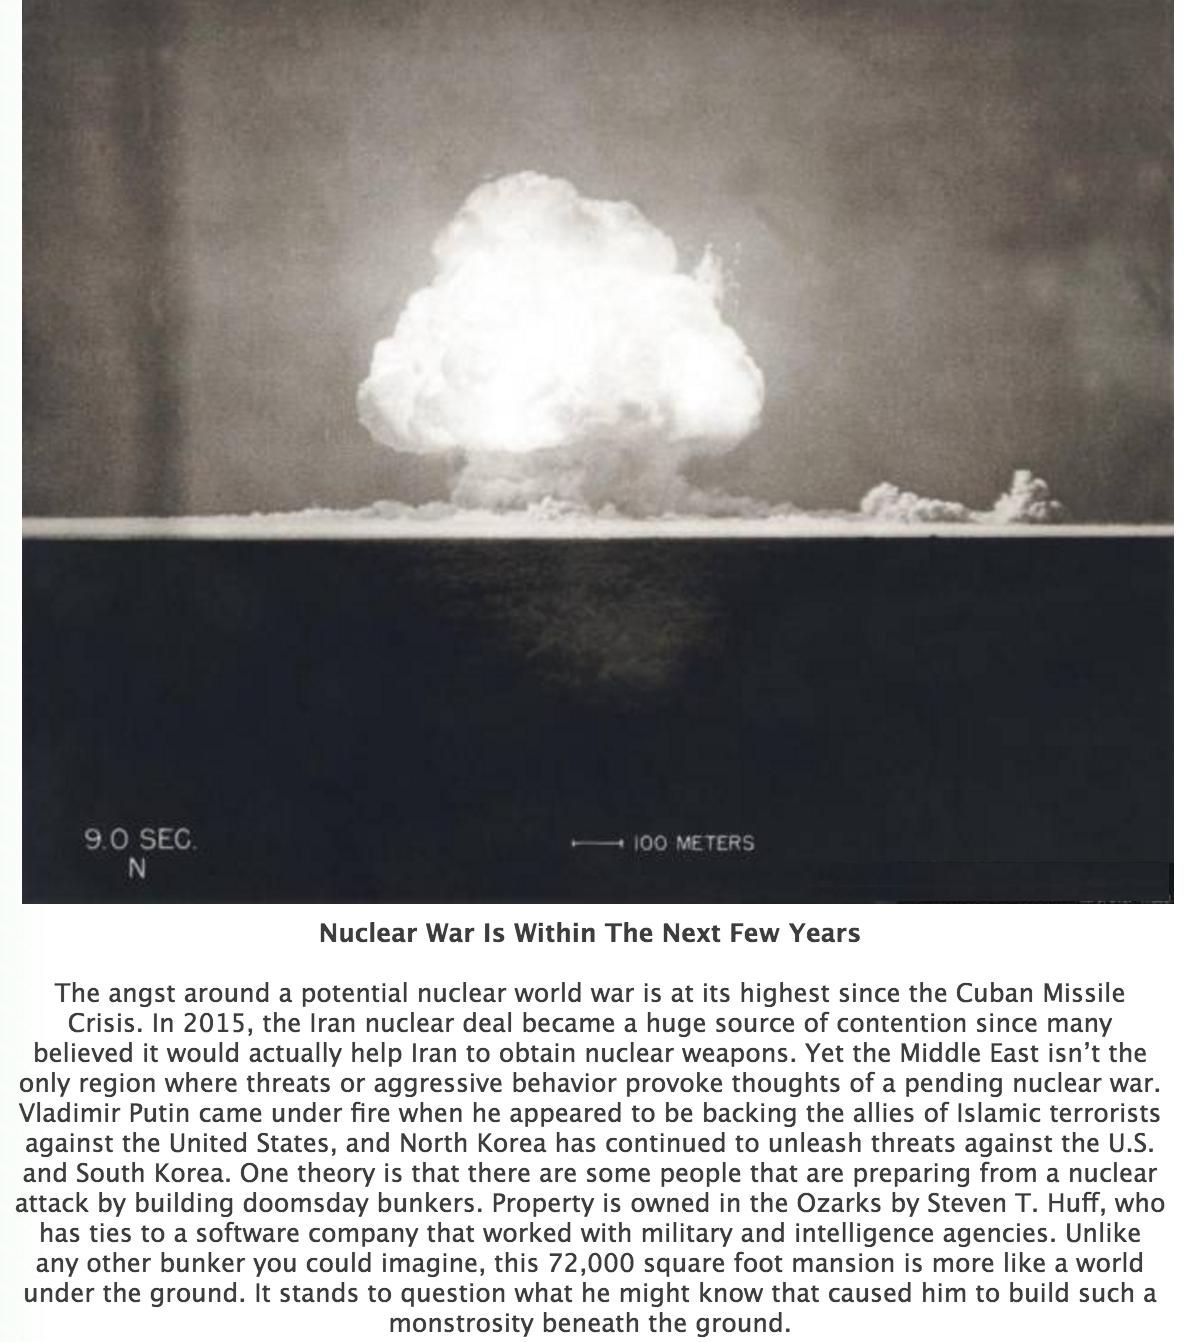 cloud - 9.0 Sec 100 Meters Nuclear War Is Within The Next Few Years The angst around a potential nuclear world war is at its highest since the Cuban Missile Crisis. In 2015, the Iran nuclear deal became a huge source of contention since many believed it w